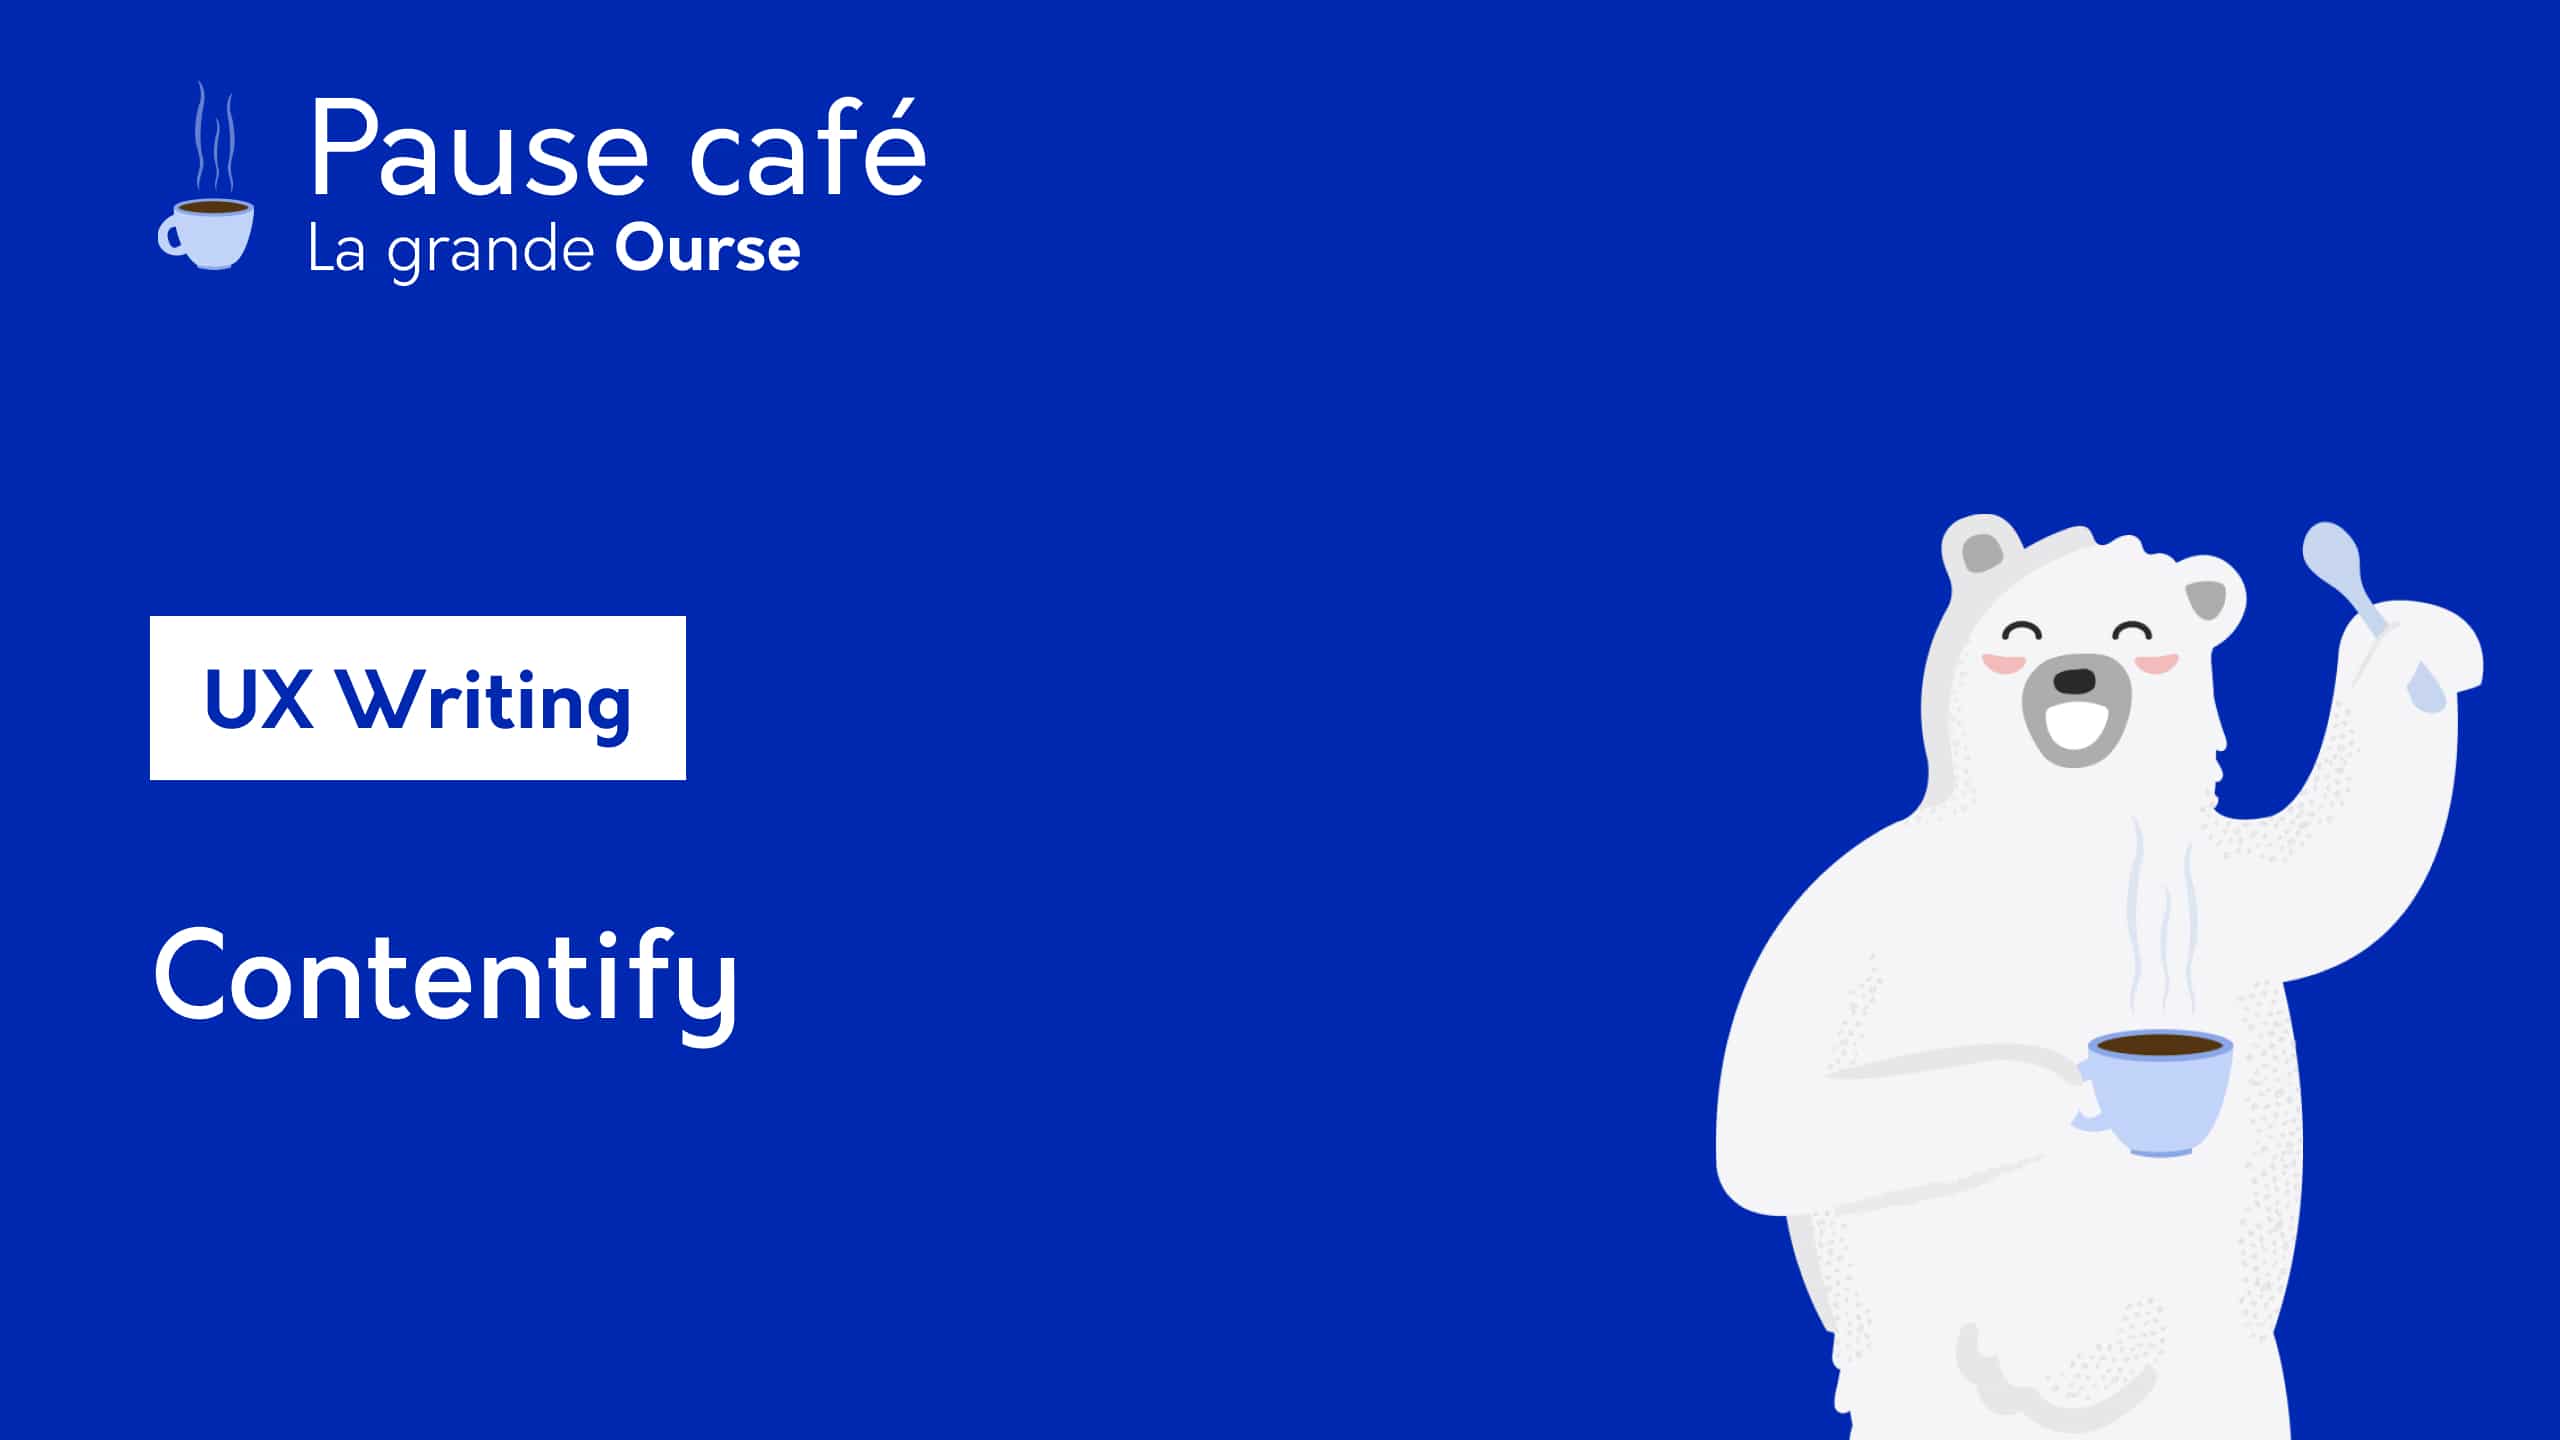 Pause café - UX Writing - Contentify